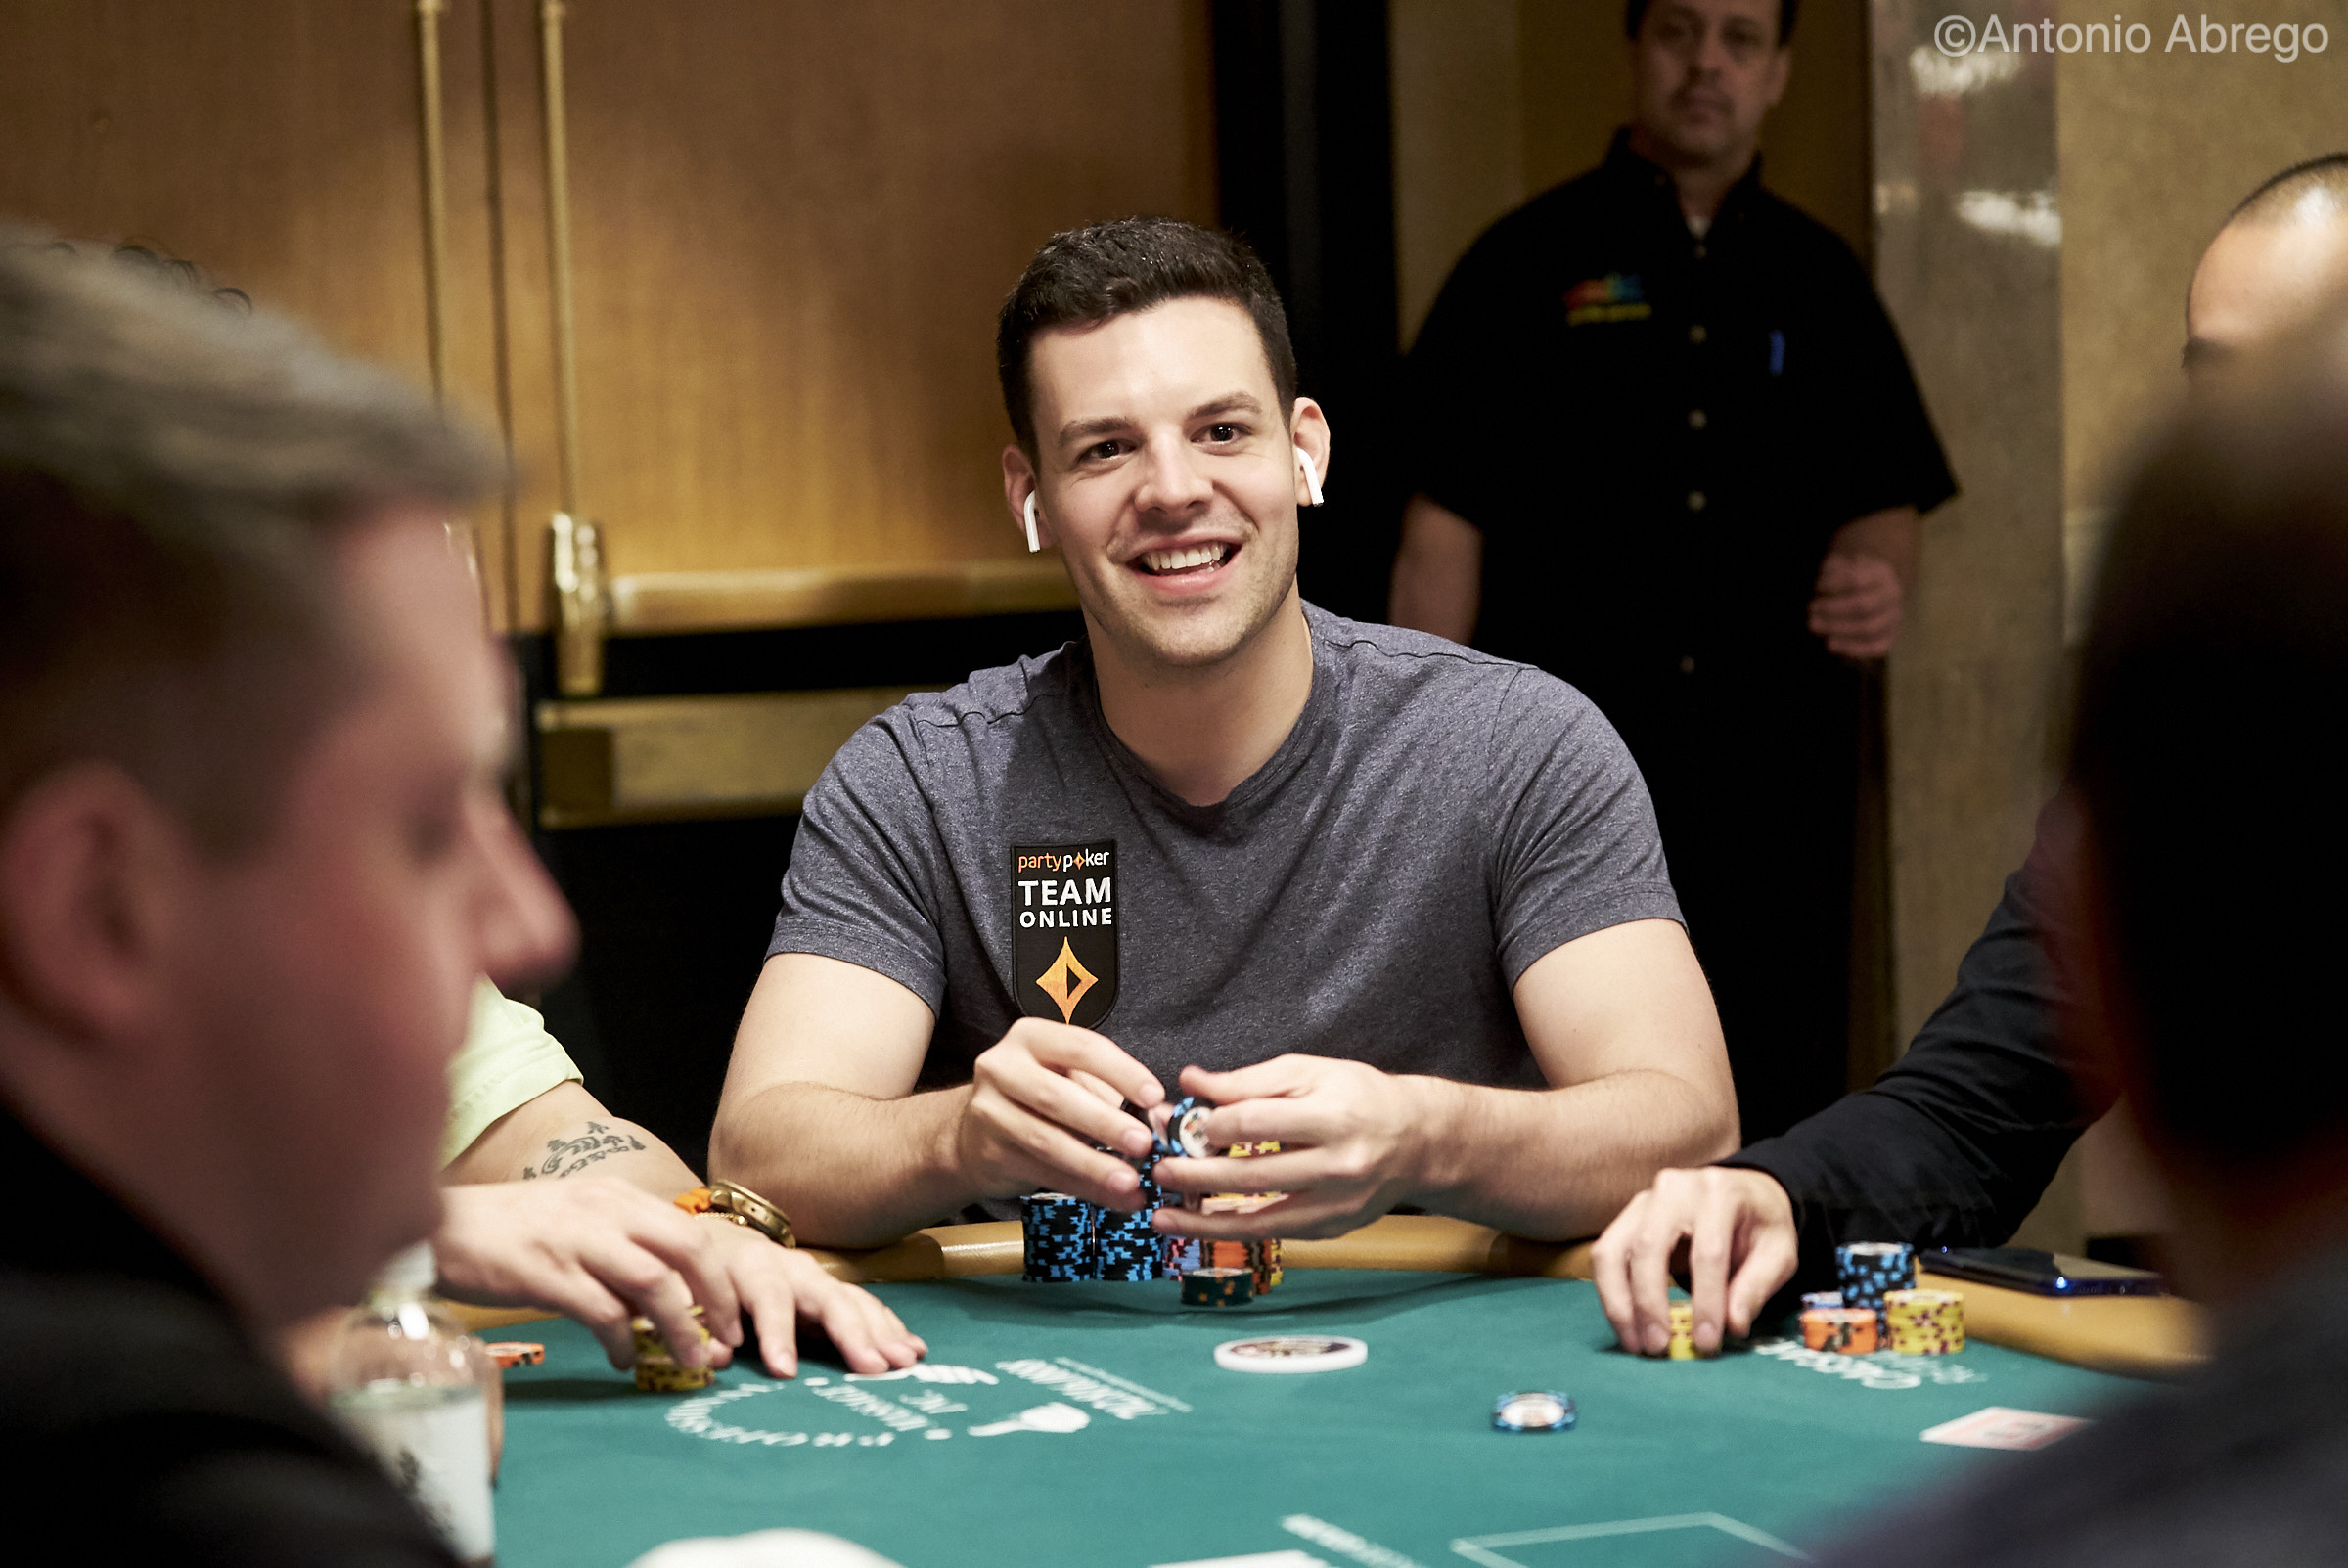 BALANCING CONTENT CREATION & BECOMING THE BEST POKER PLAYER, Kevin Martin